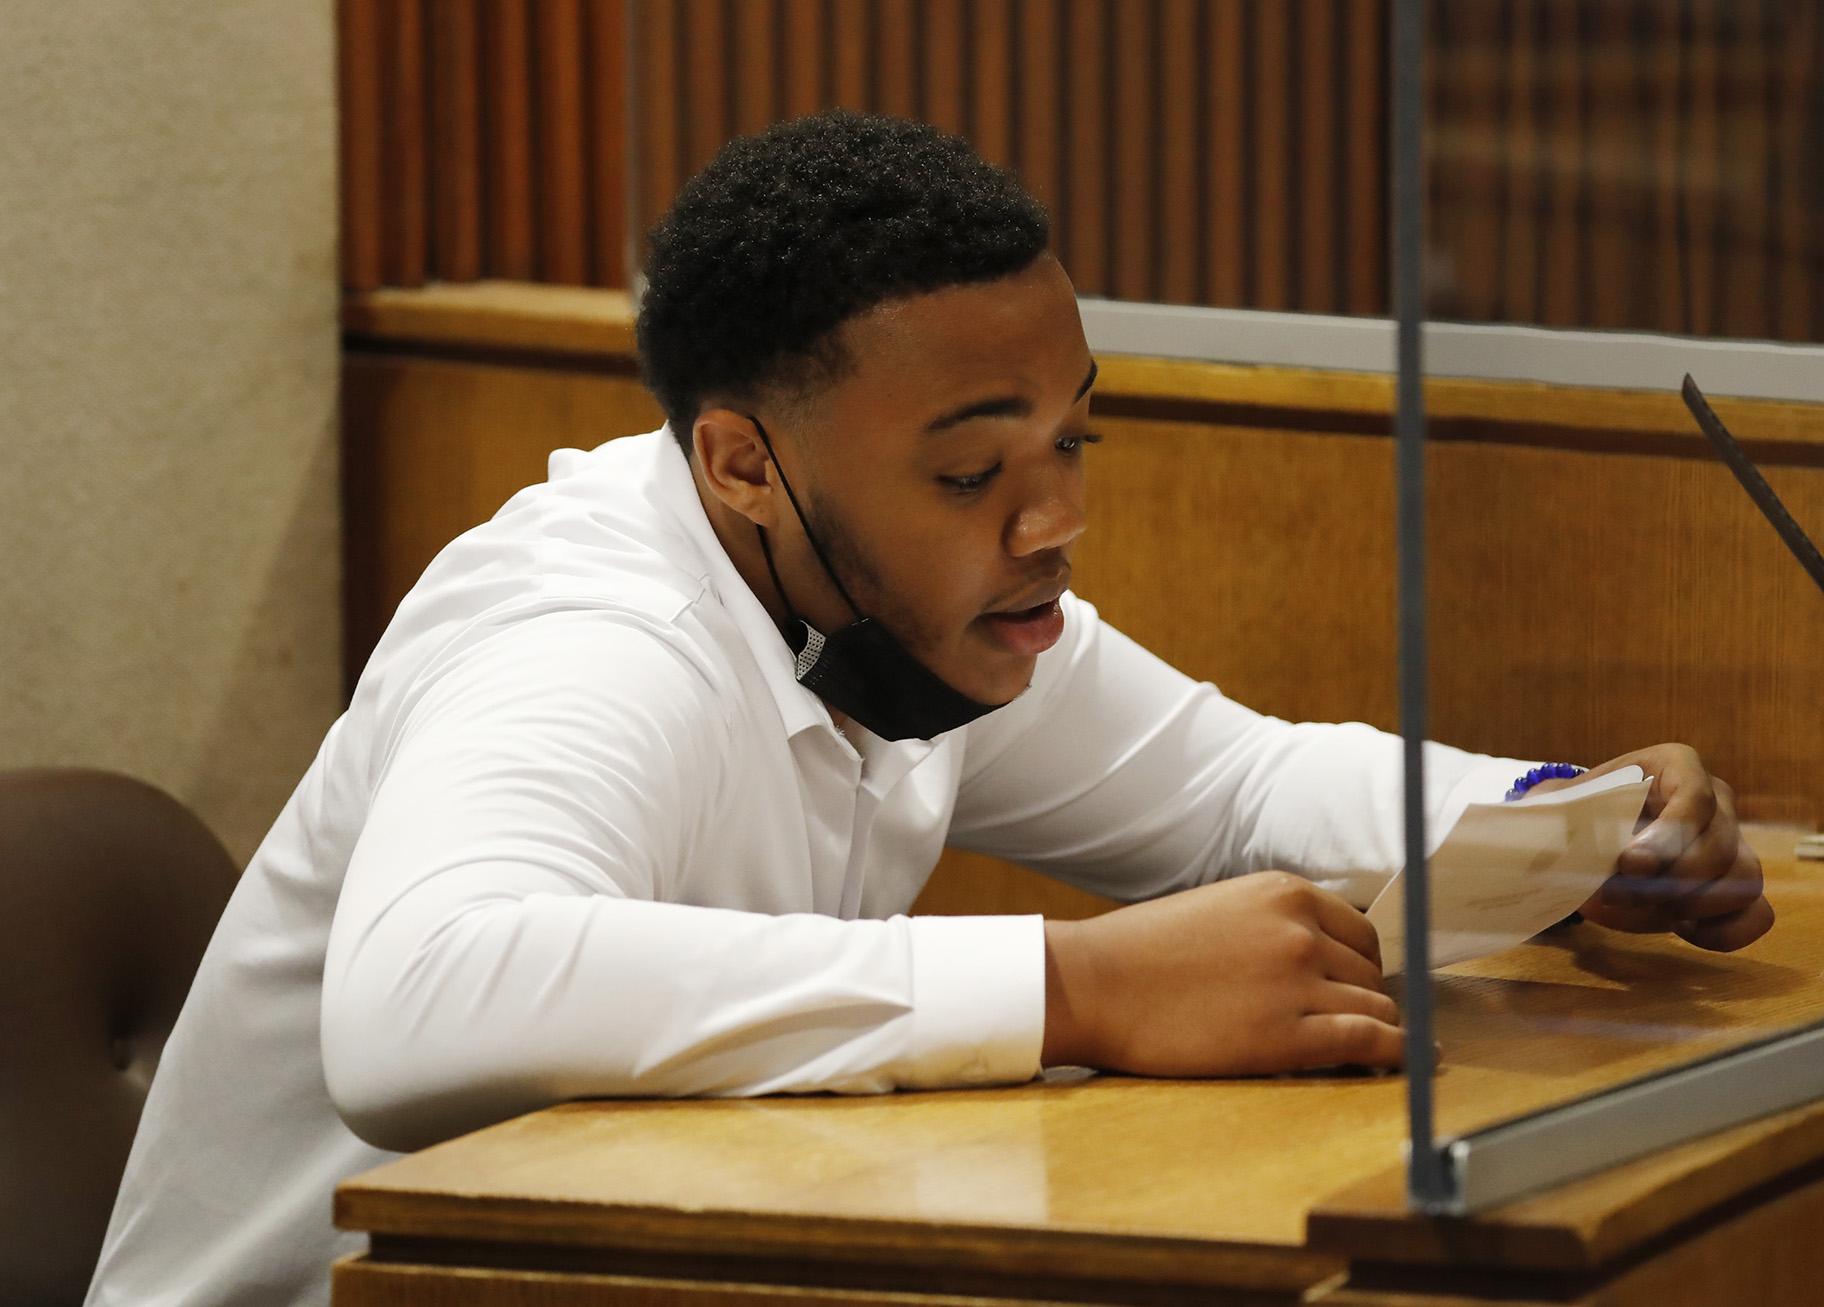 Nathaniel Pendleton Jr., brother of Hadiya Pendleton, reads his victim impact statement during the sentencing hearing of Kenneth Williams for the murder of Hadiya Pendleton at the Leighton Criminal Court Building in Chicago on July 20, 2021. (Jose M. Osorio / Chicago Tribune / Pool)